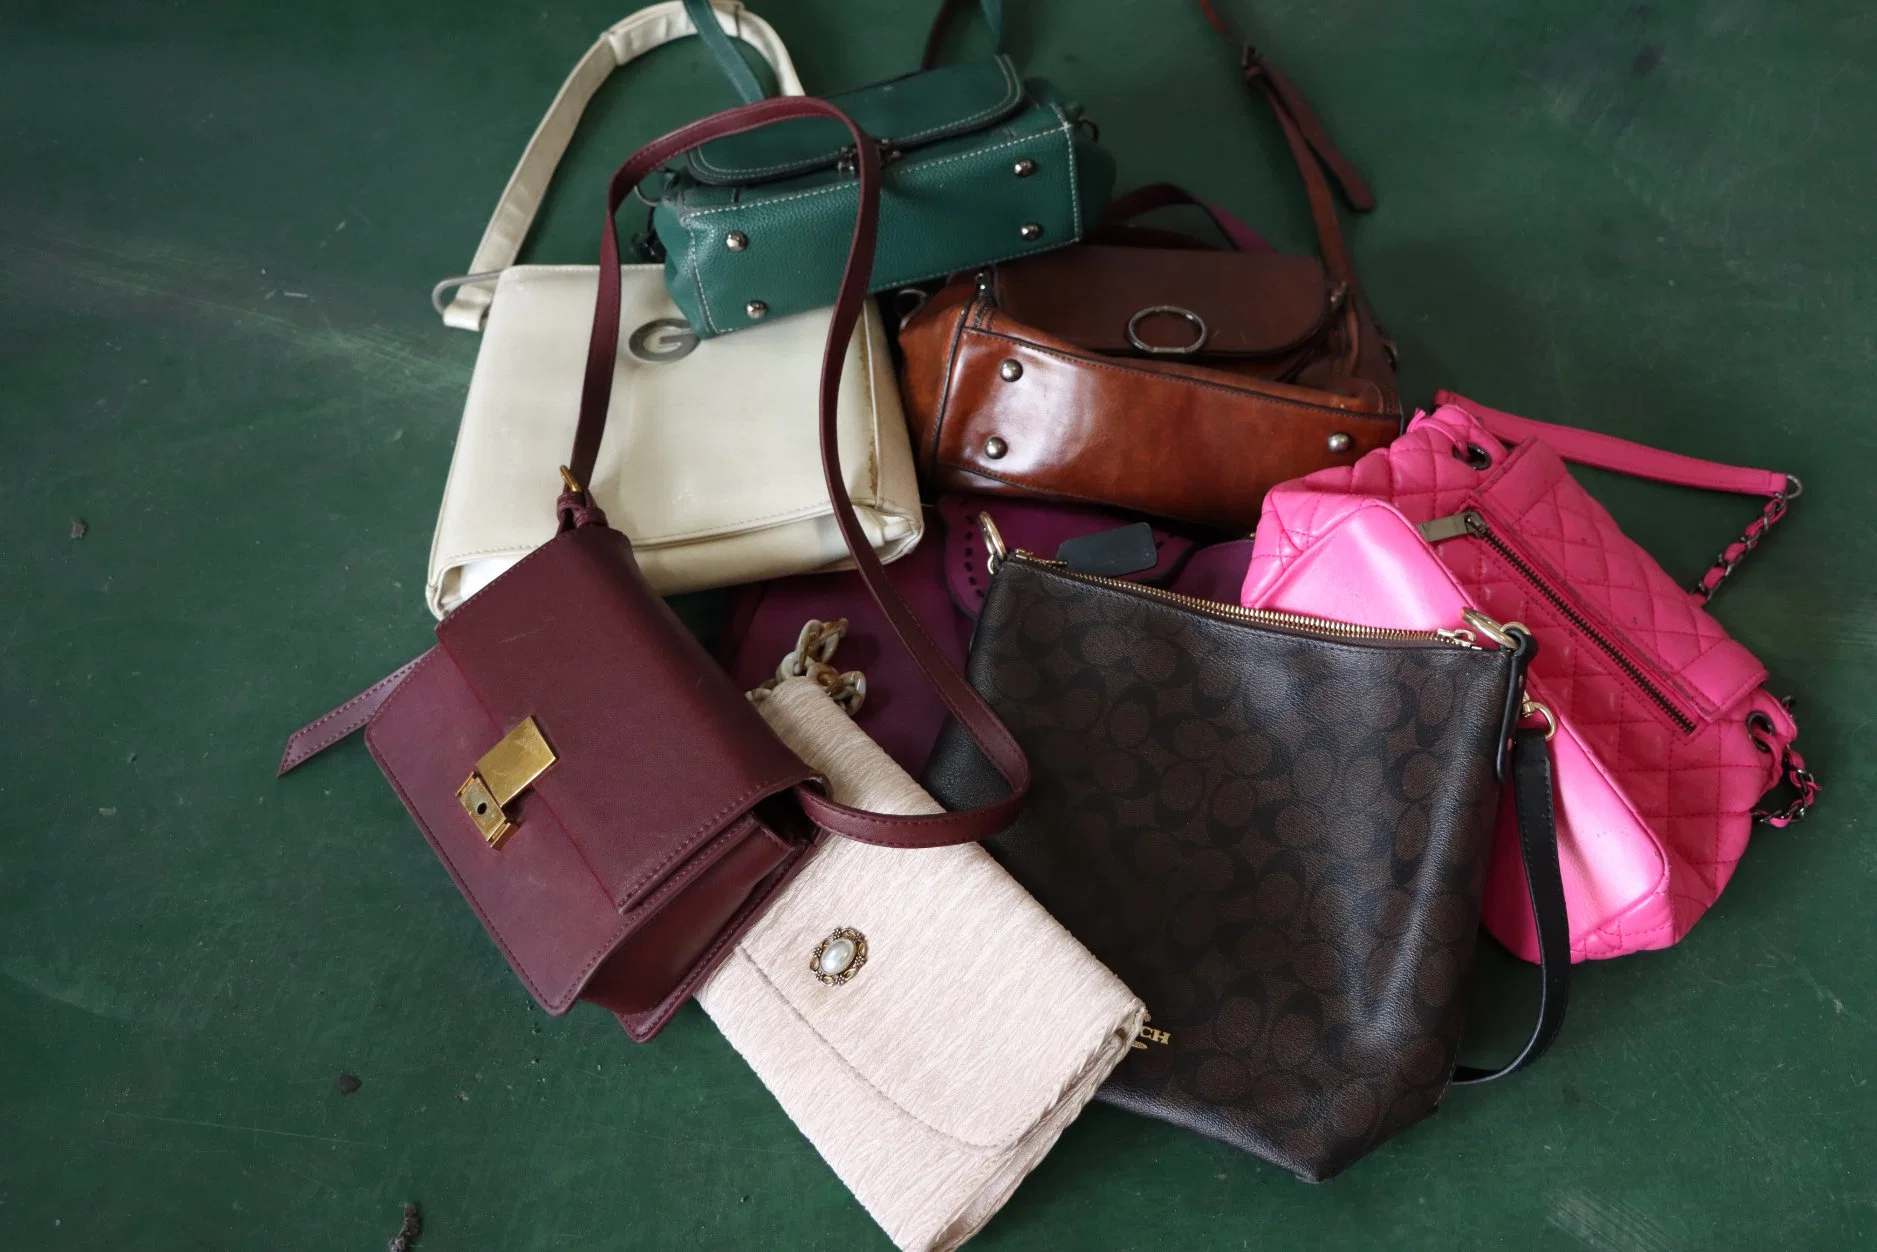 Factory Wholesale A Grade High Quality Leather Used Bags Bales Designer Bags Cheap Handbags Per Kilo 45kg From UK Ladies Mixed Second Hand Bags